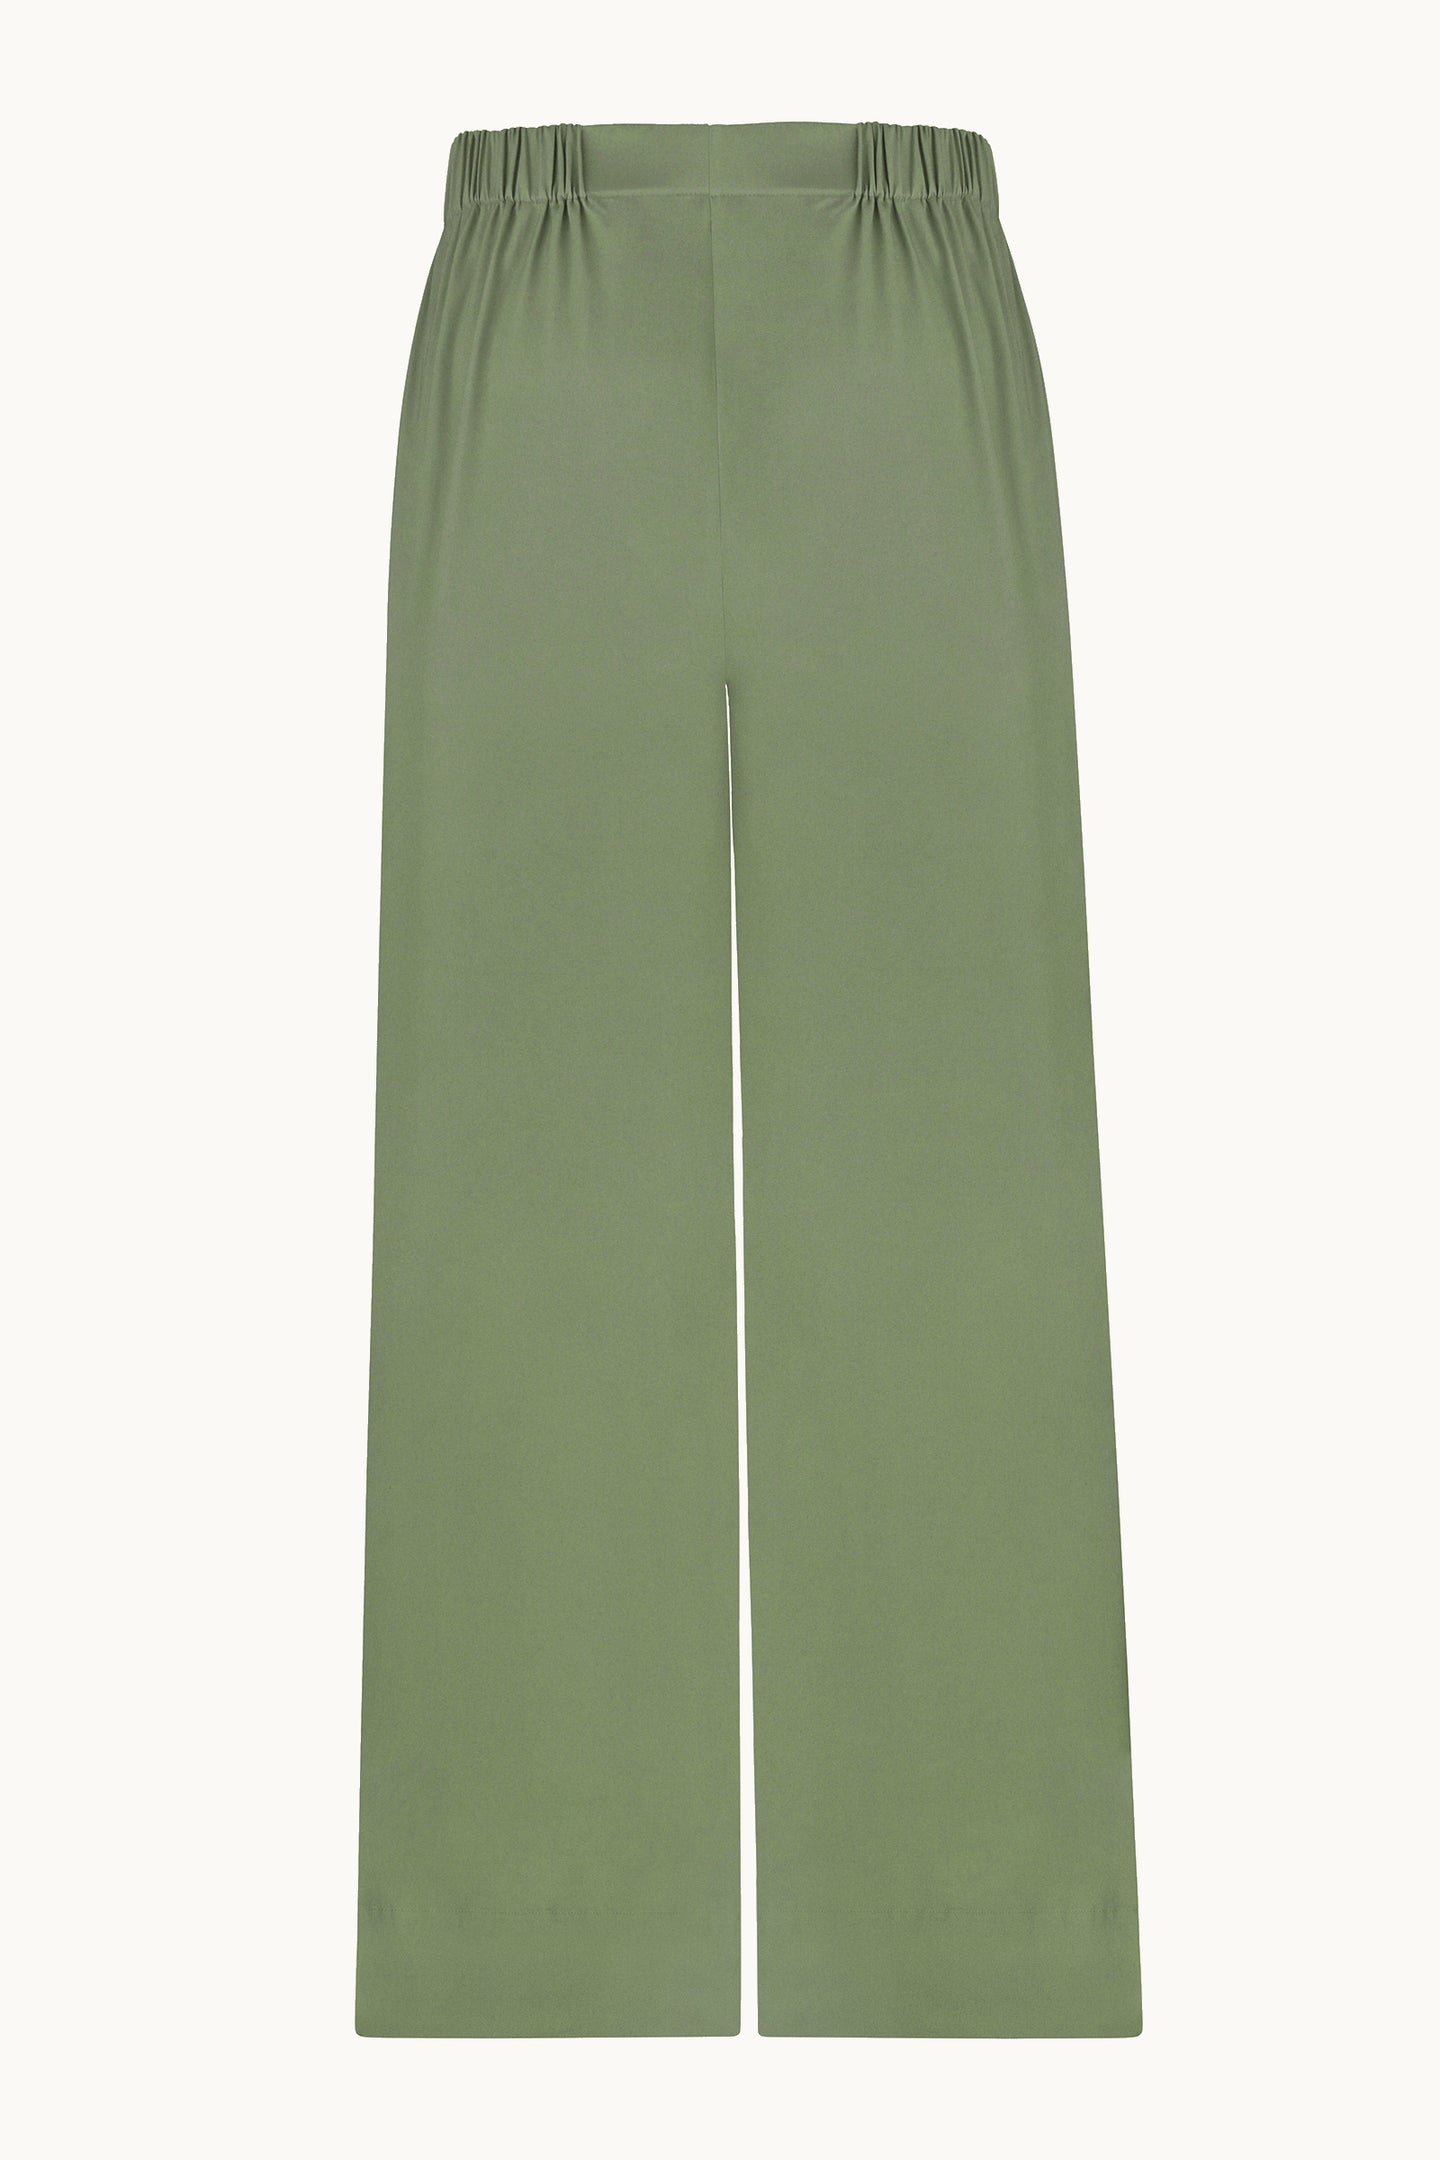 Melba olive trousers back view